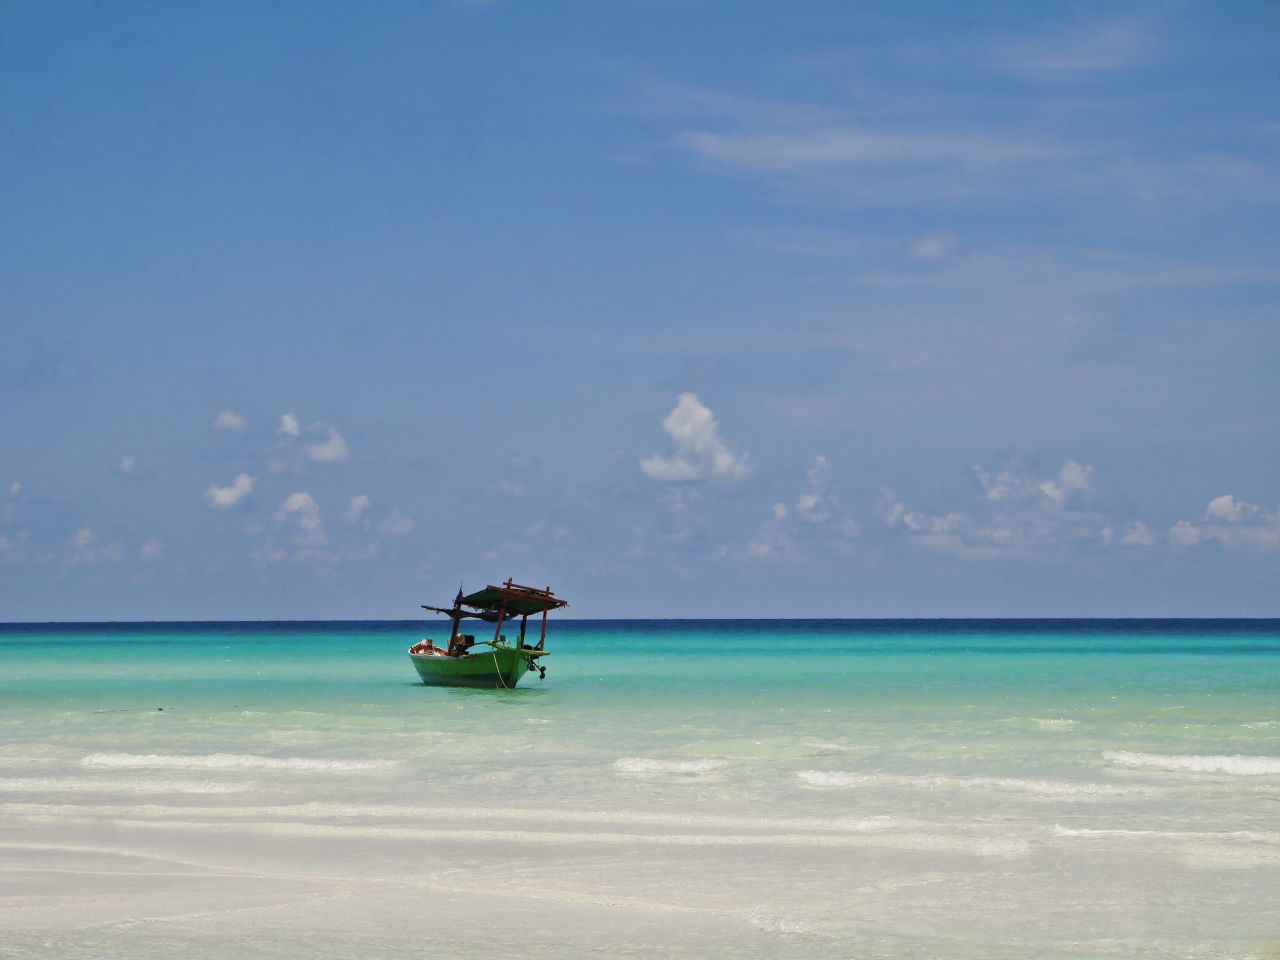 Koh Rong is Cambodia's second largest island.